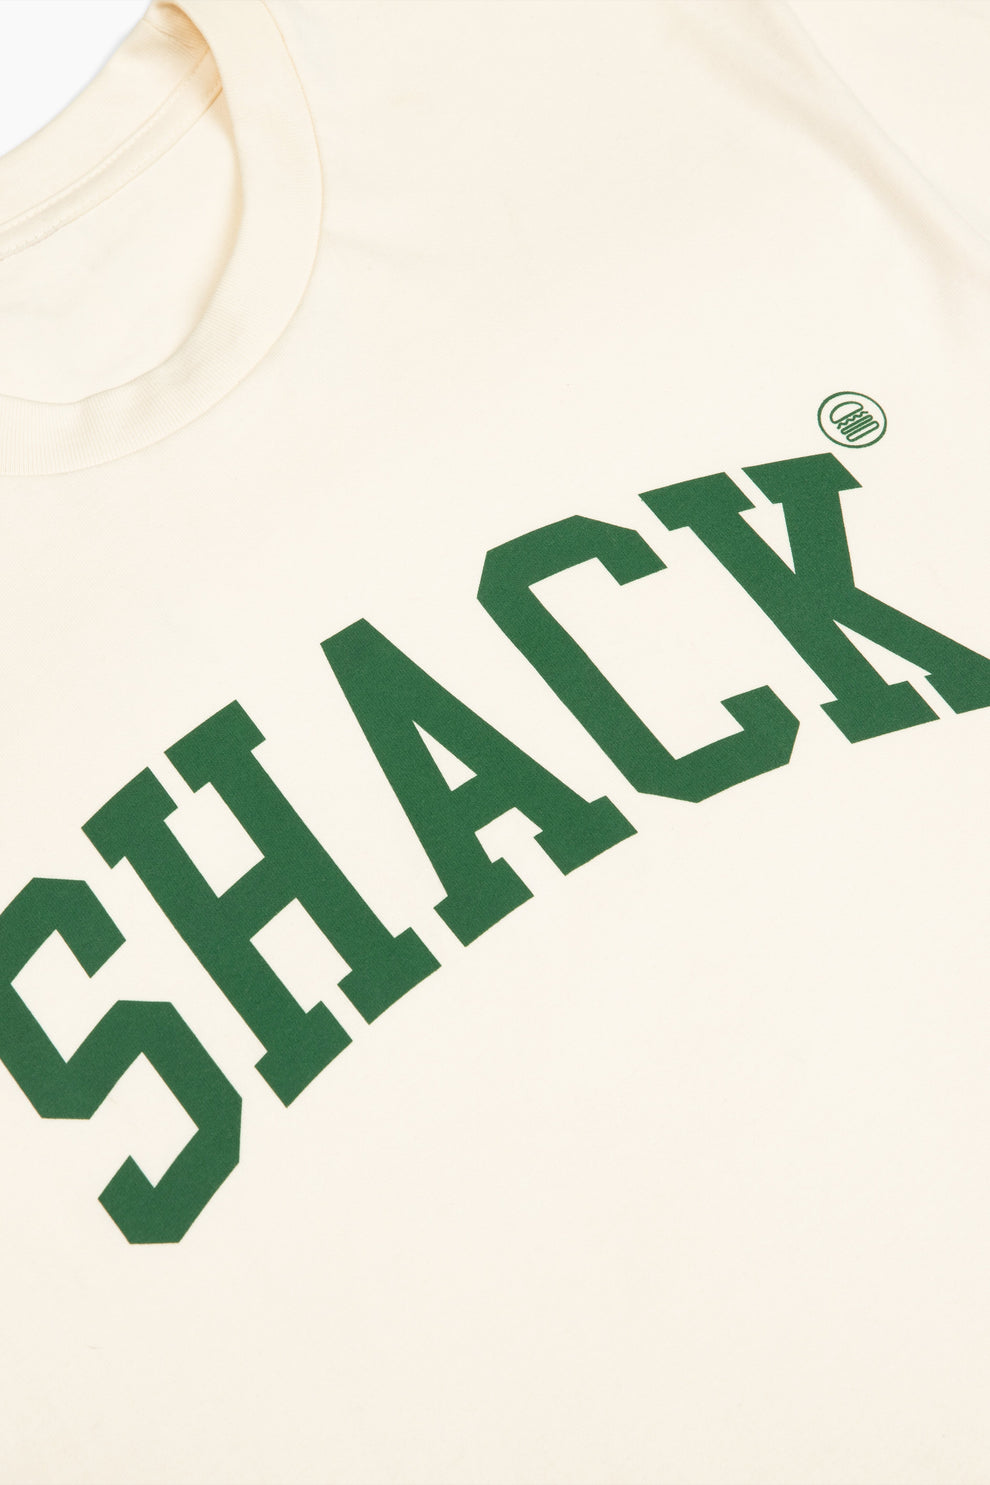 Closeup of the cream-colored sweatshirt with the word "Shack" displayed across the chest